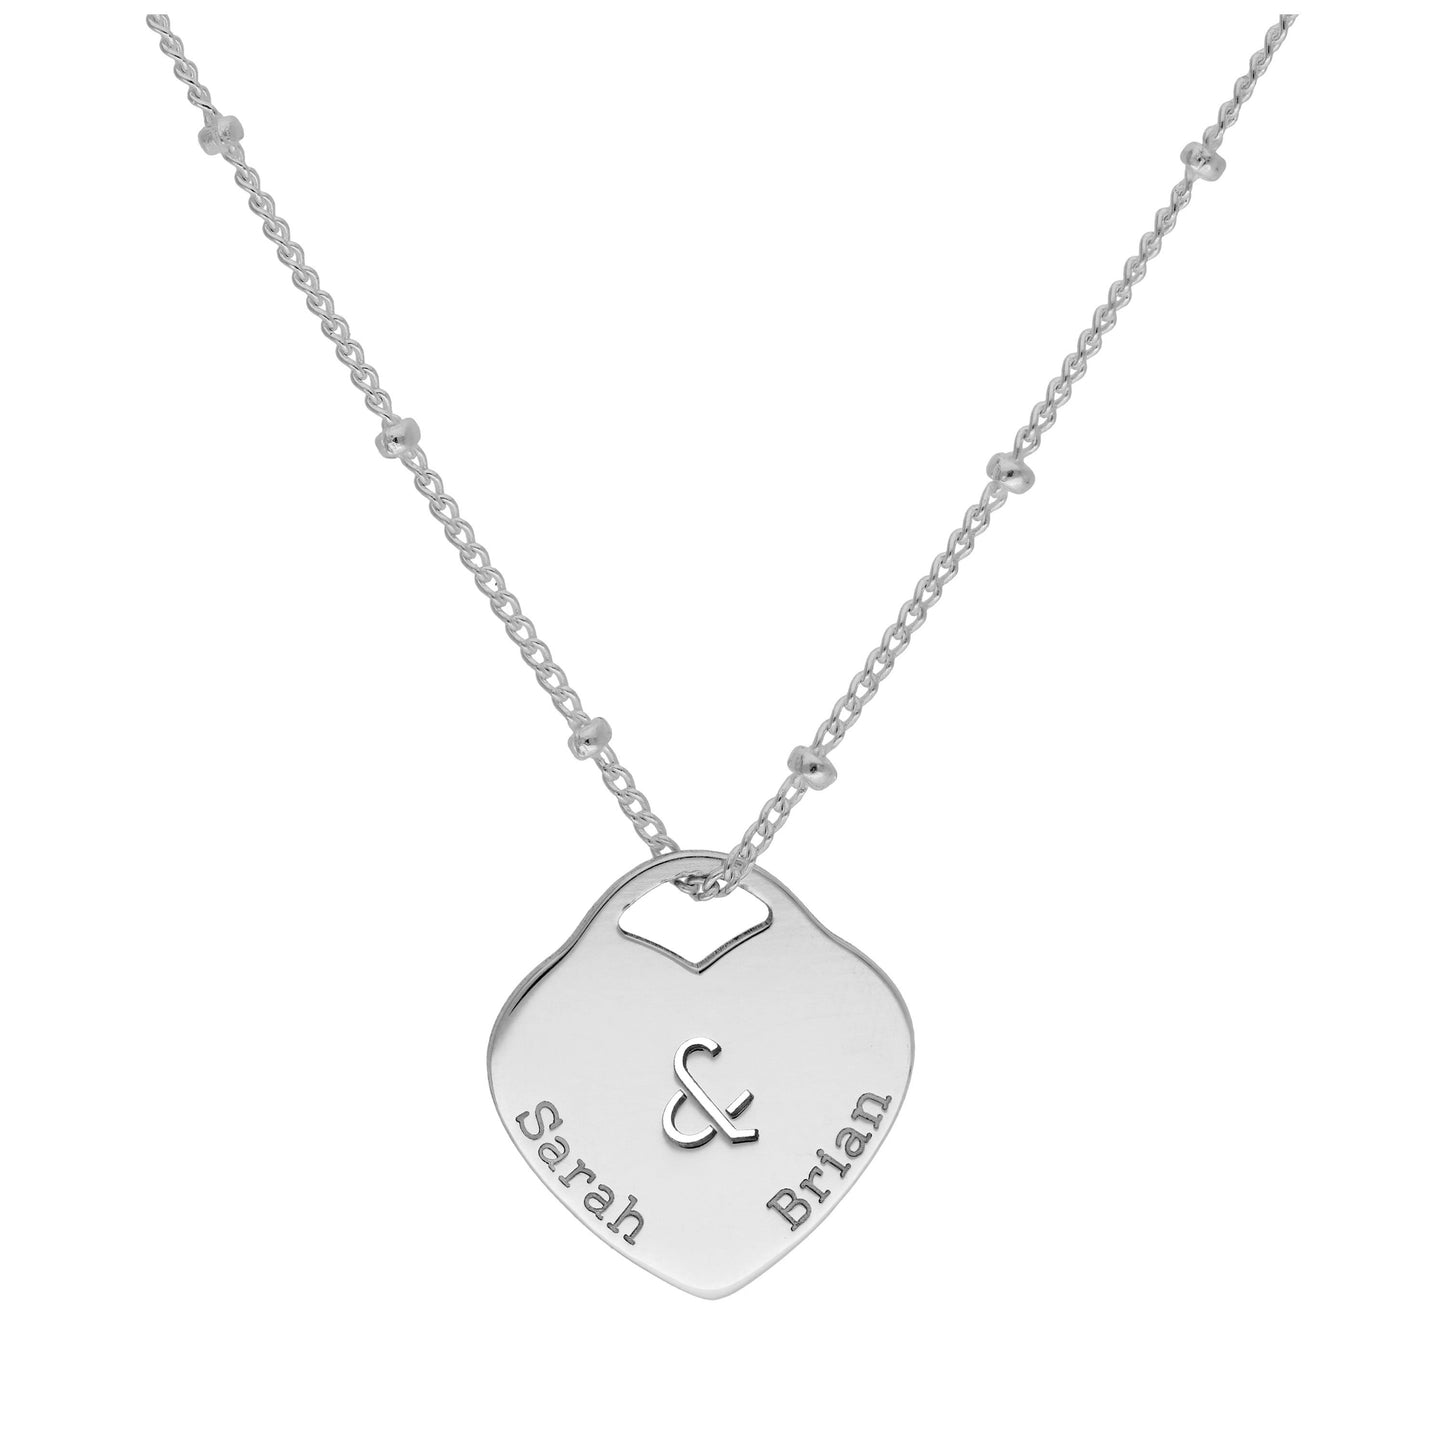 Bespoke Personalised Double Name Heart Necklace 12-24 Inches